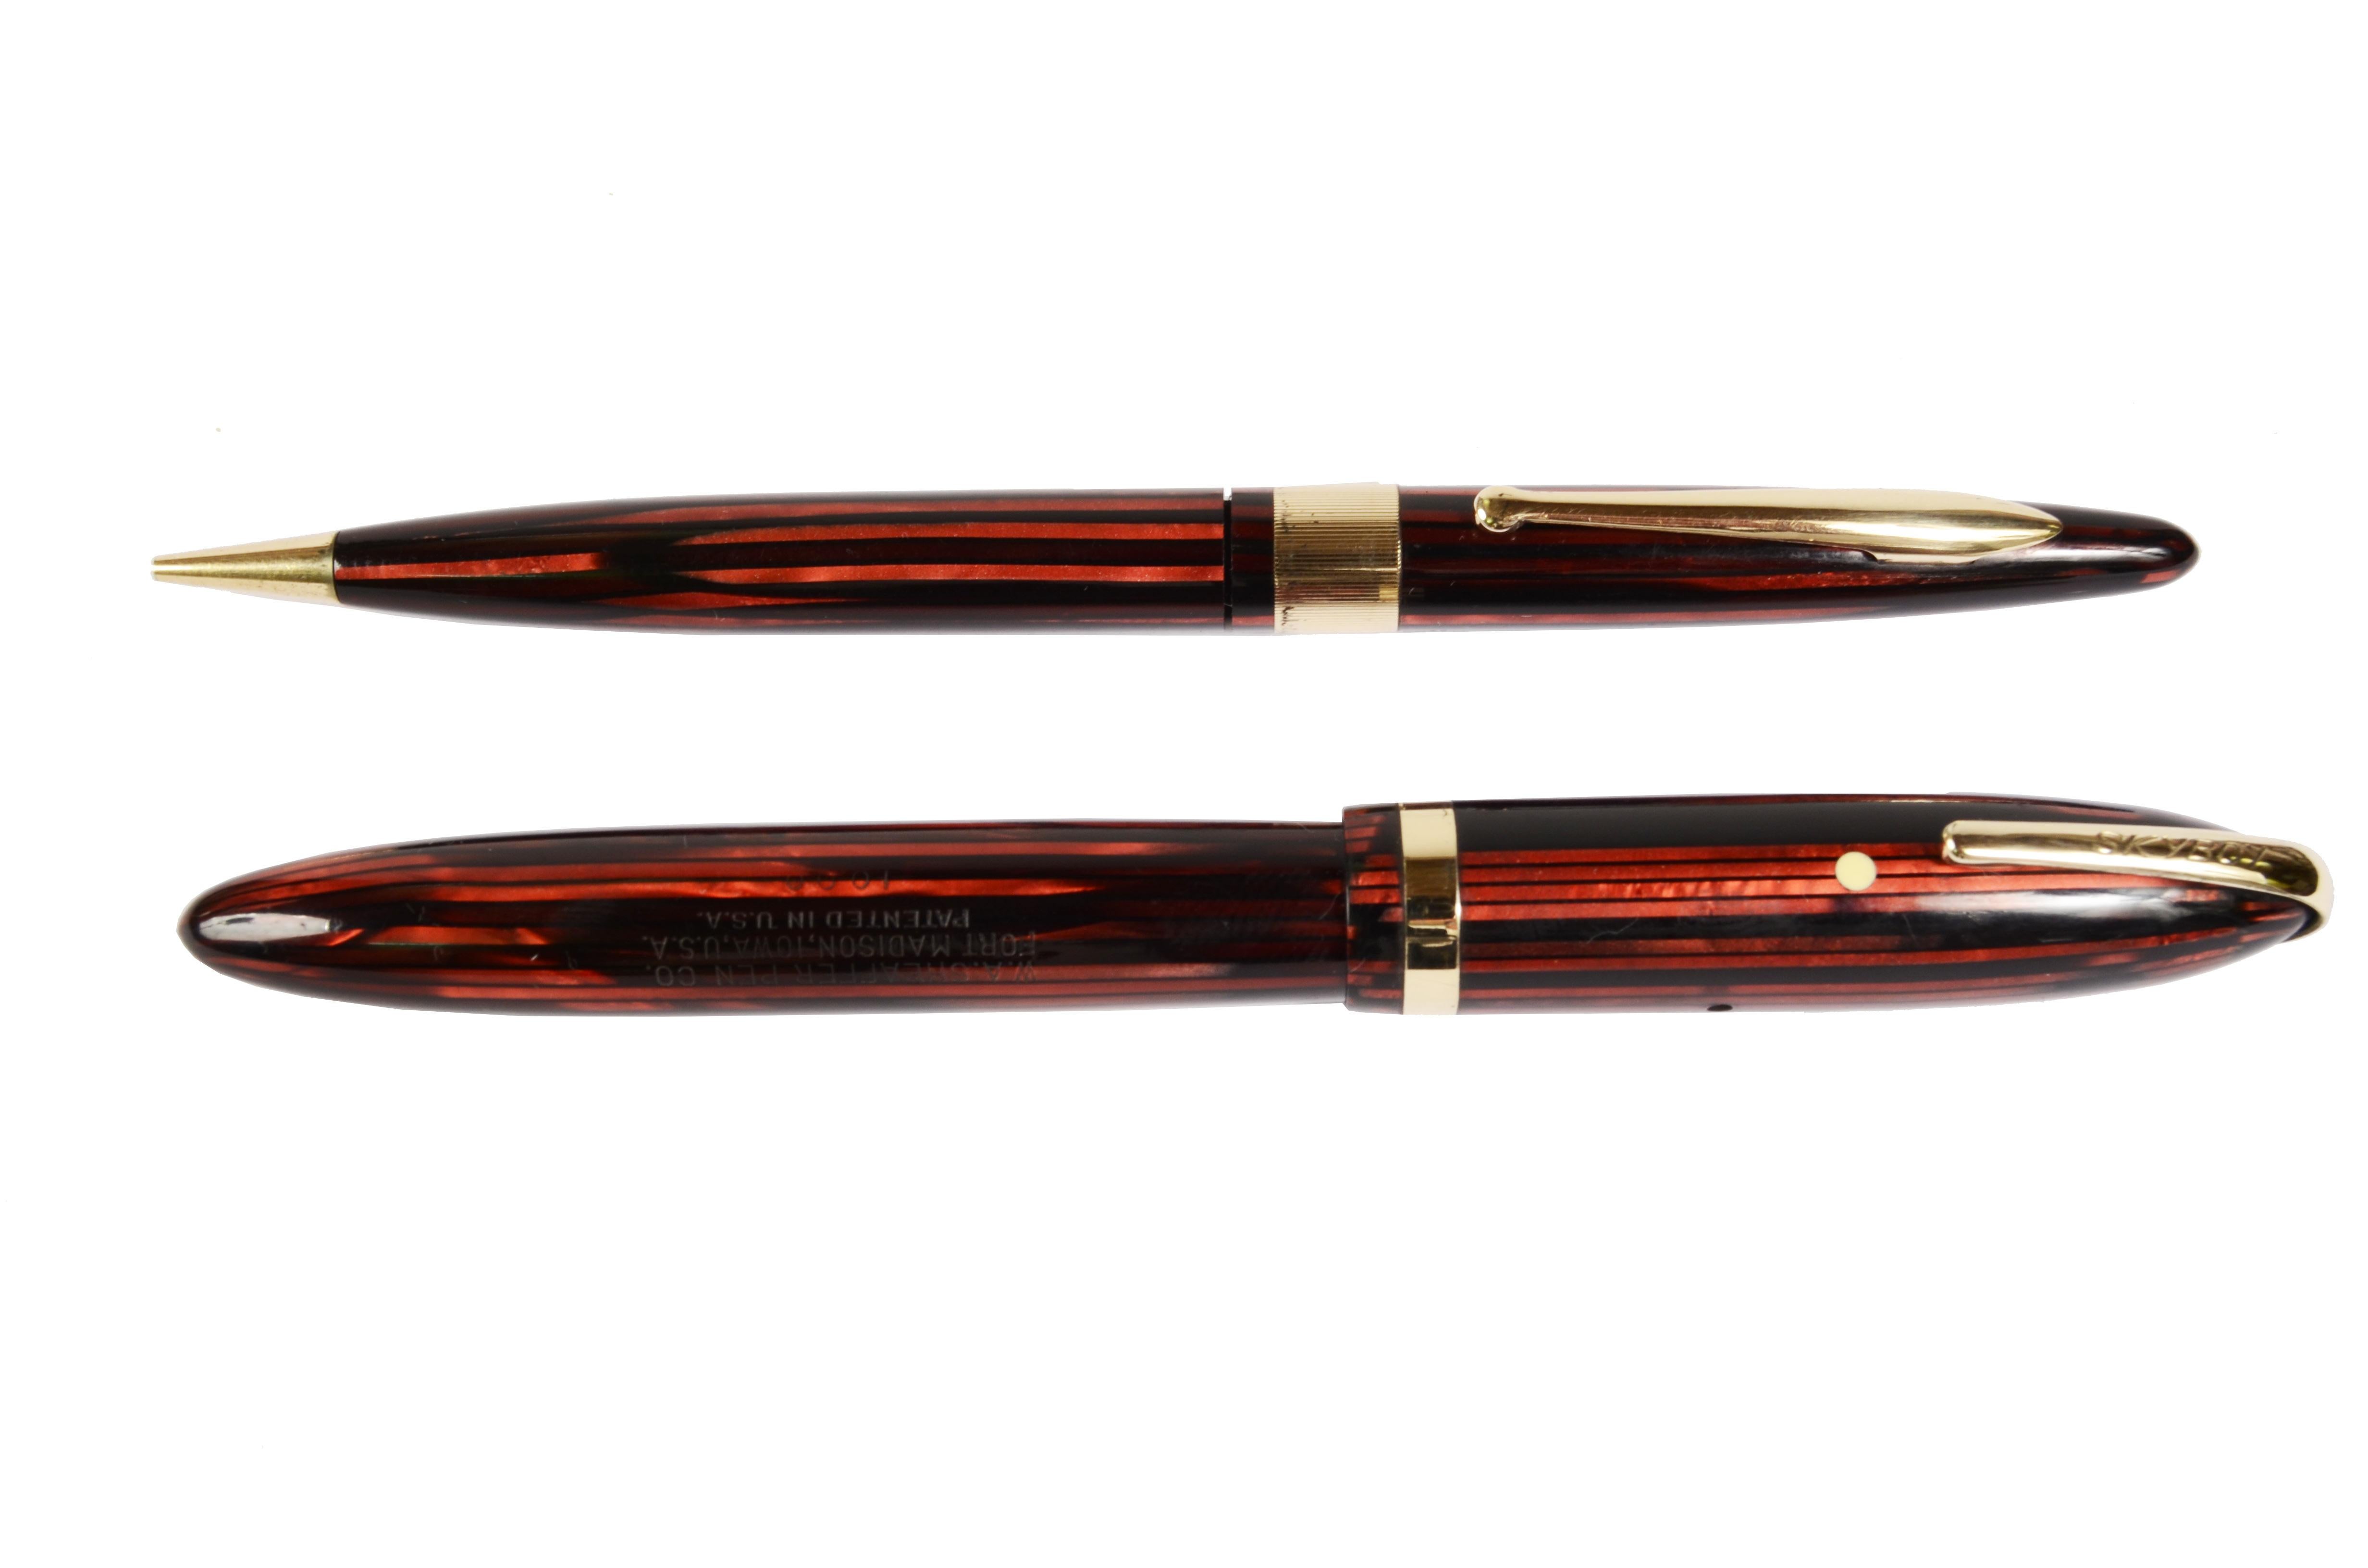 Set Sheaffer fountain pen and pencil model Skyboy with military clip, produced for American conscripts from mid-1941 to 1946, length 130 mm – inches 5.1 diametro 0.45. Original LifeTime two-tone nib n. 7398402, side lever loading. In excellent